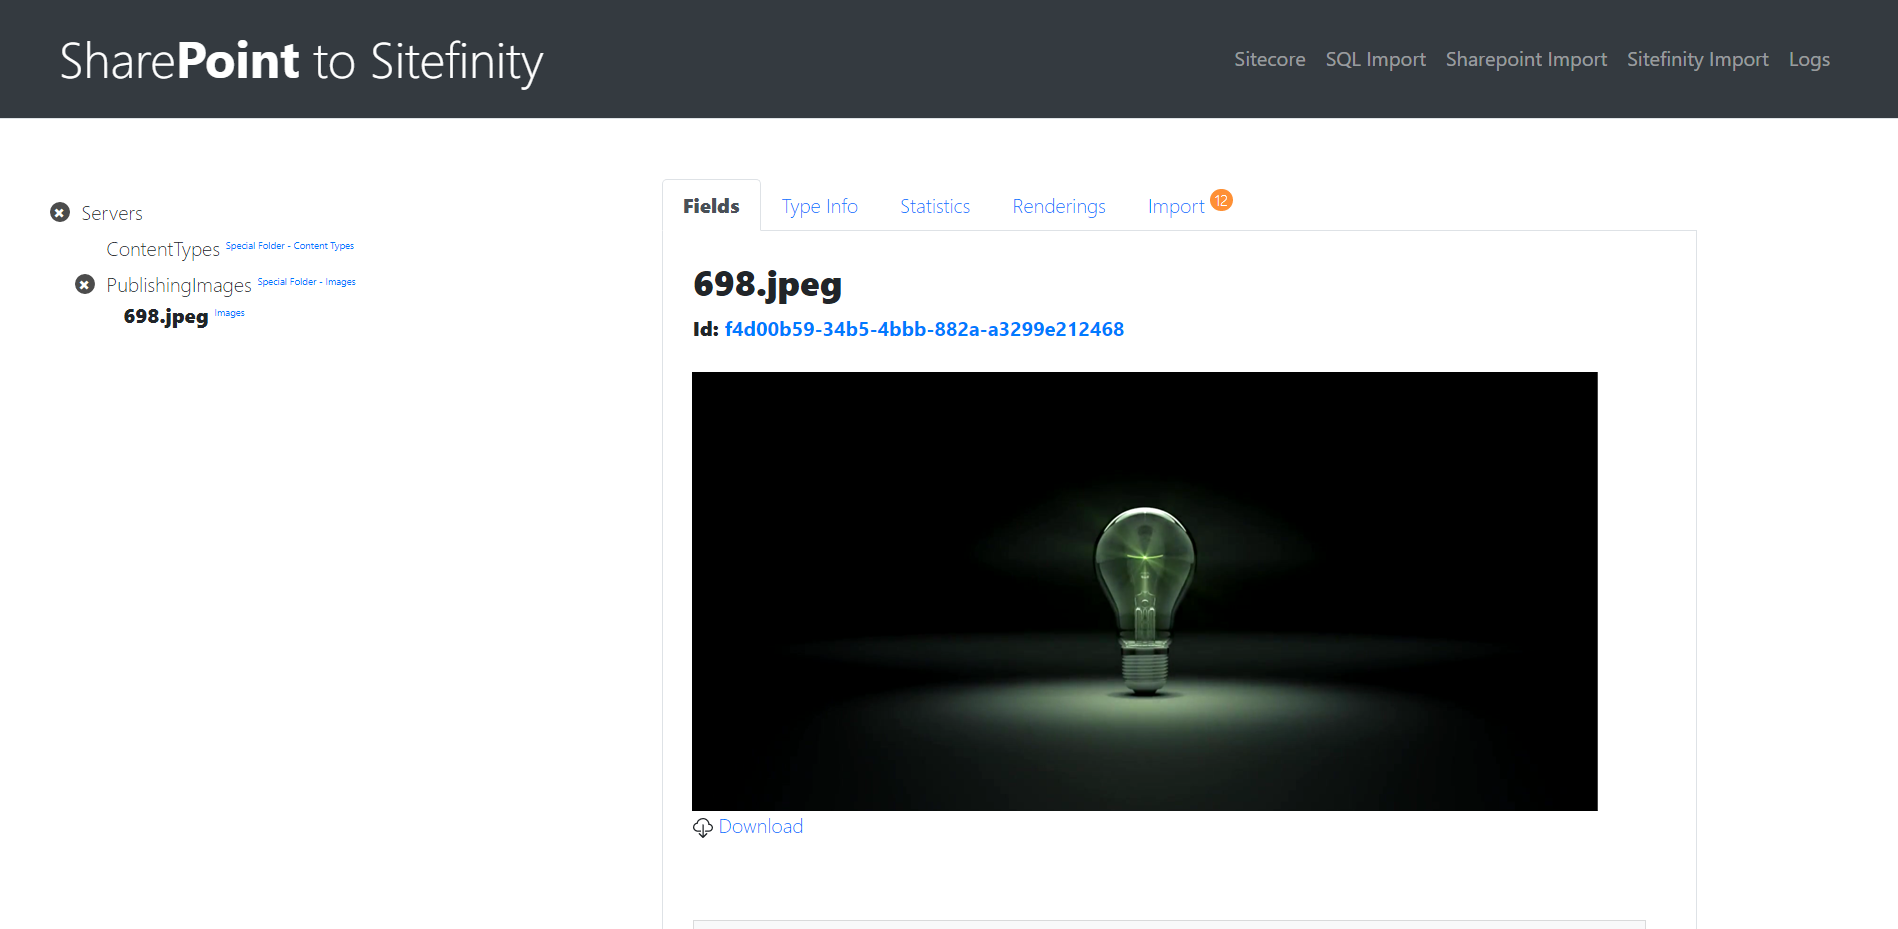 SharePoint to Sitefinity - images